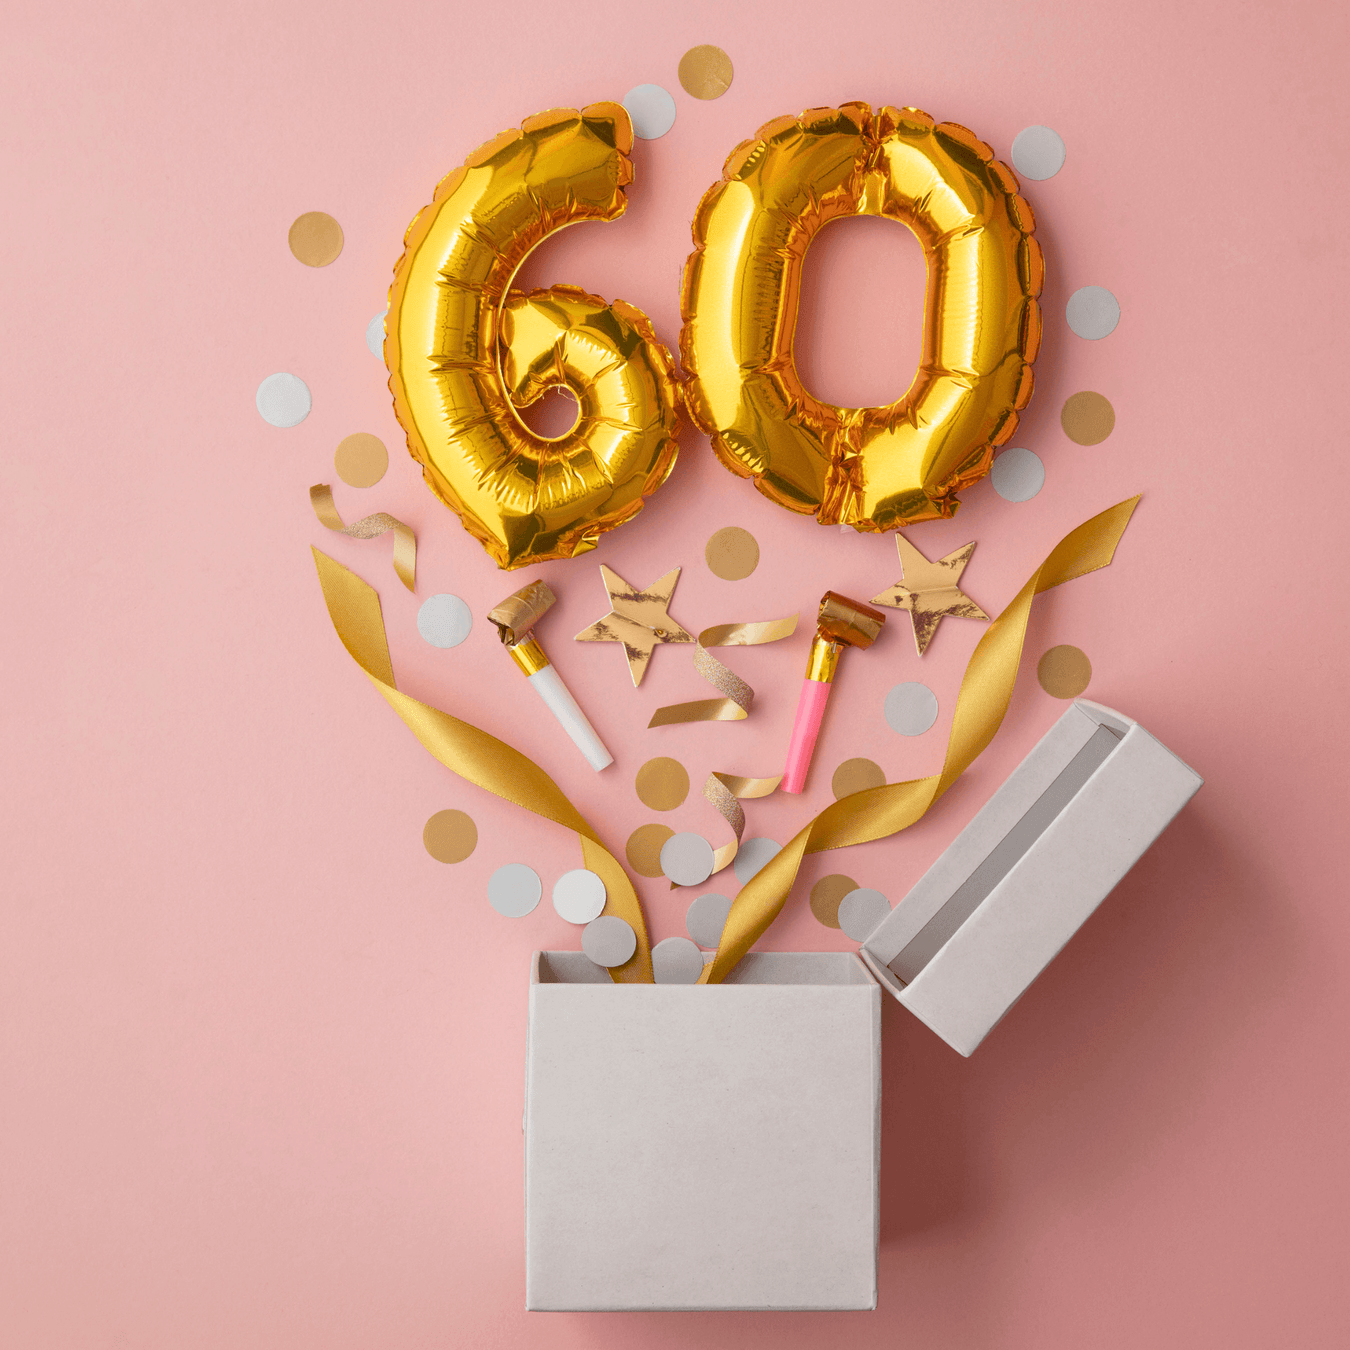 Her 60th birthday is coming. Don't forget the perfect gift! | Unique 60th  birthday gift, 60th birthday gifts, 60th birthday ideas for women